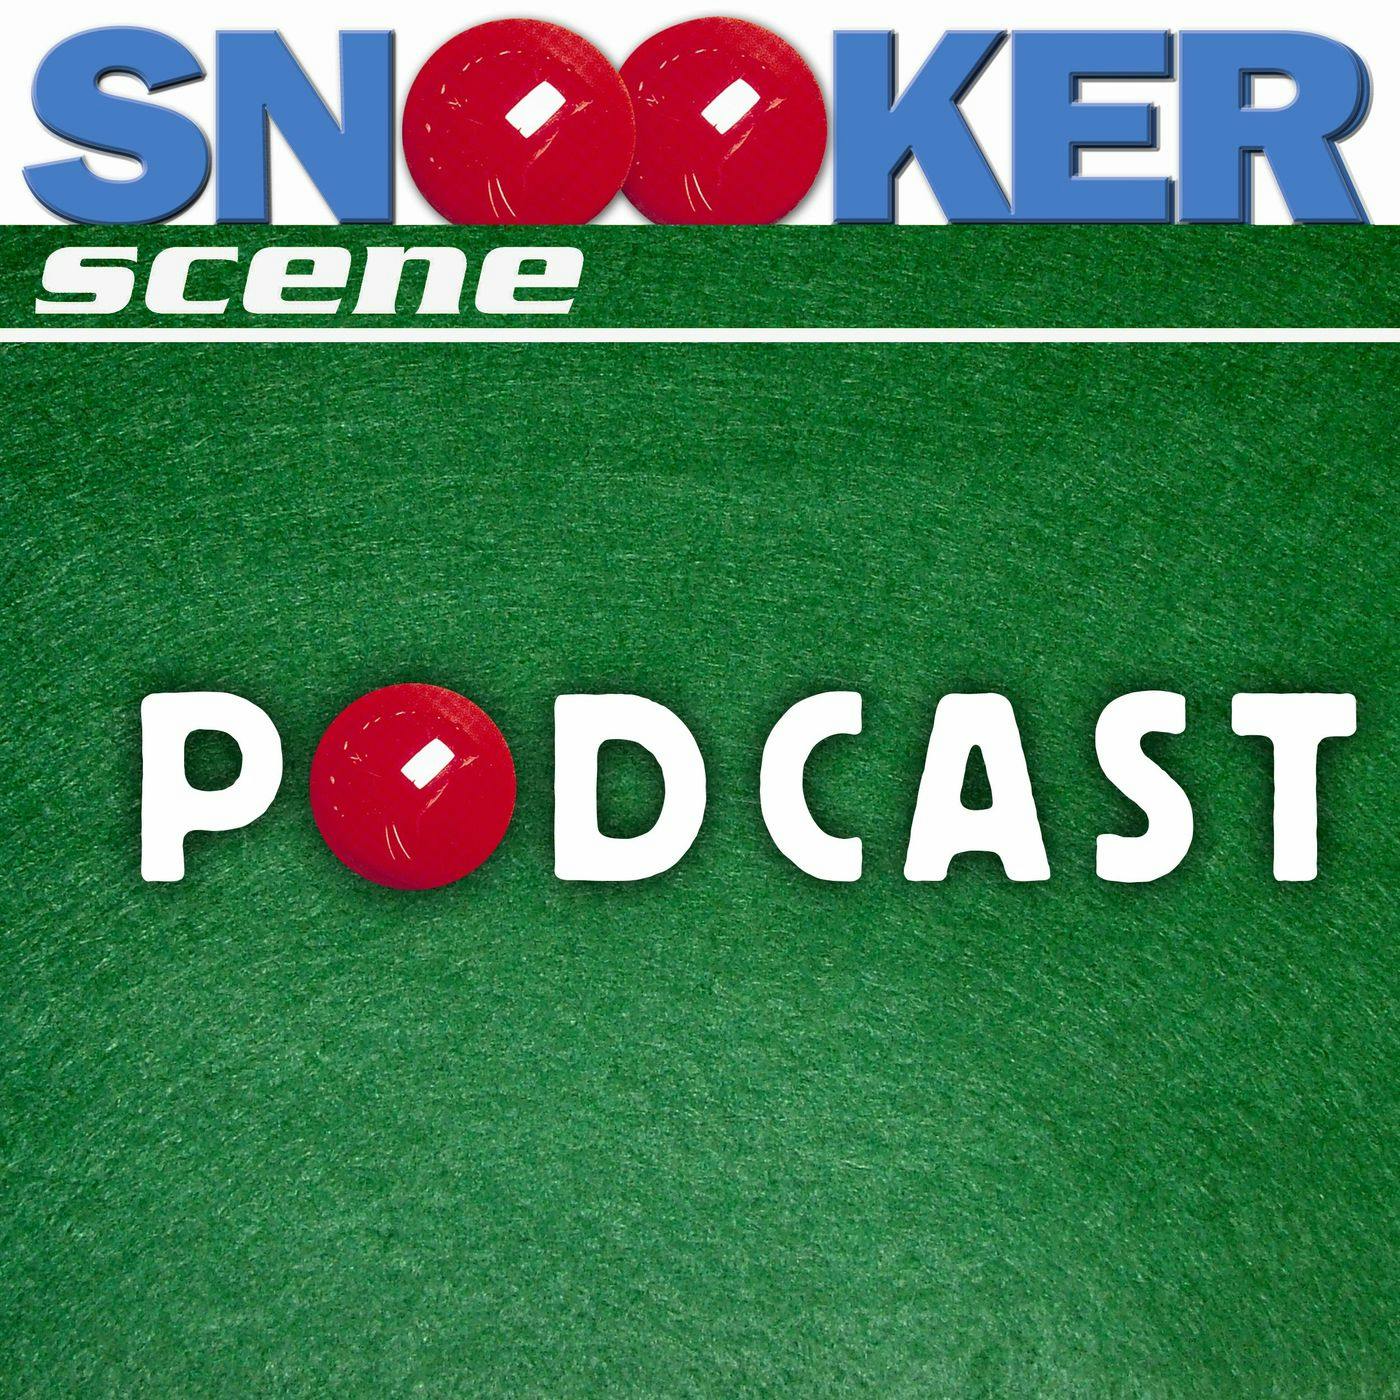 Snooker Scene Podcast episode 177 - The Sign of Four